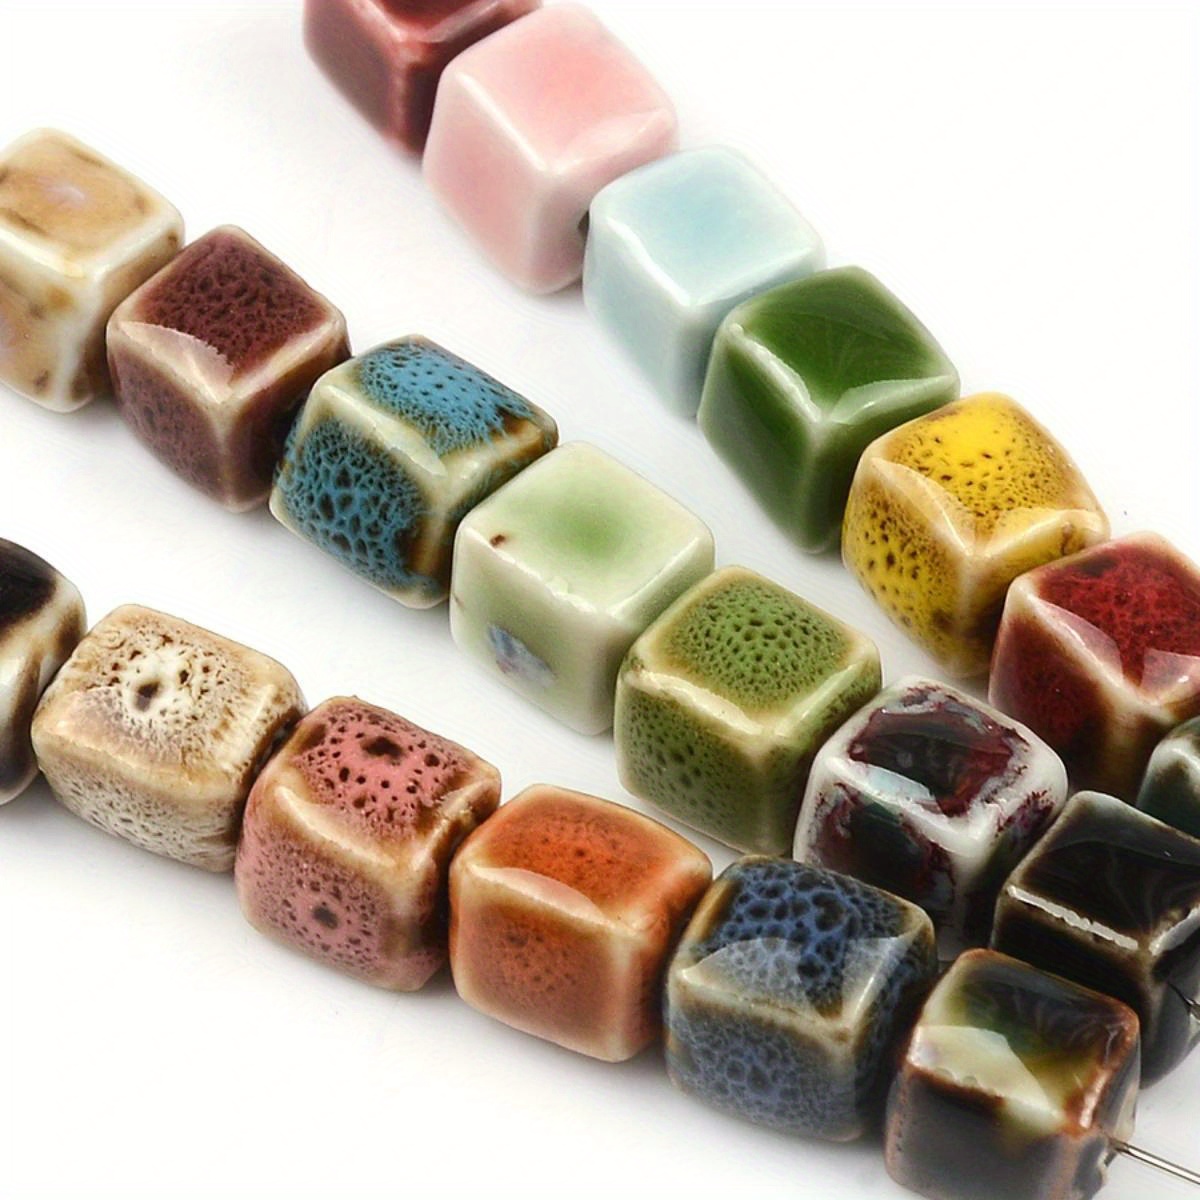 

20pcs 0.8/1cm Square Ceramic Porcelain Loose Spacer Beads For Jewelry Making Diy Special Unique Charms Bracelet Necklace Beaded Pendant Decors Craft Supplies